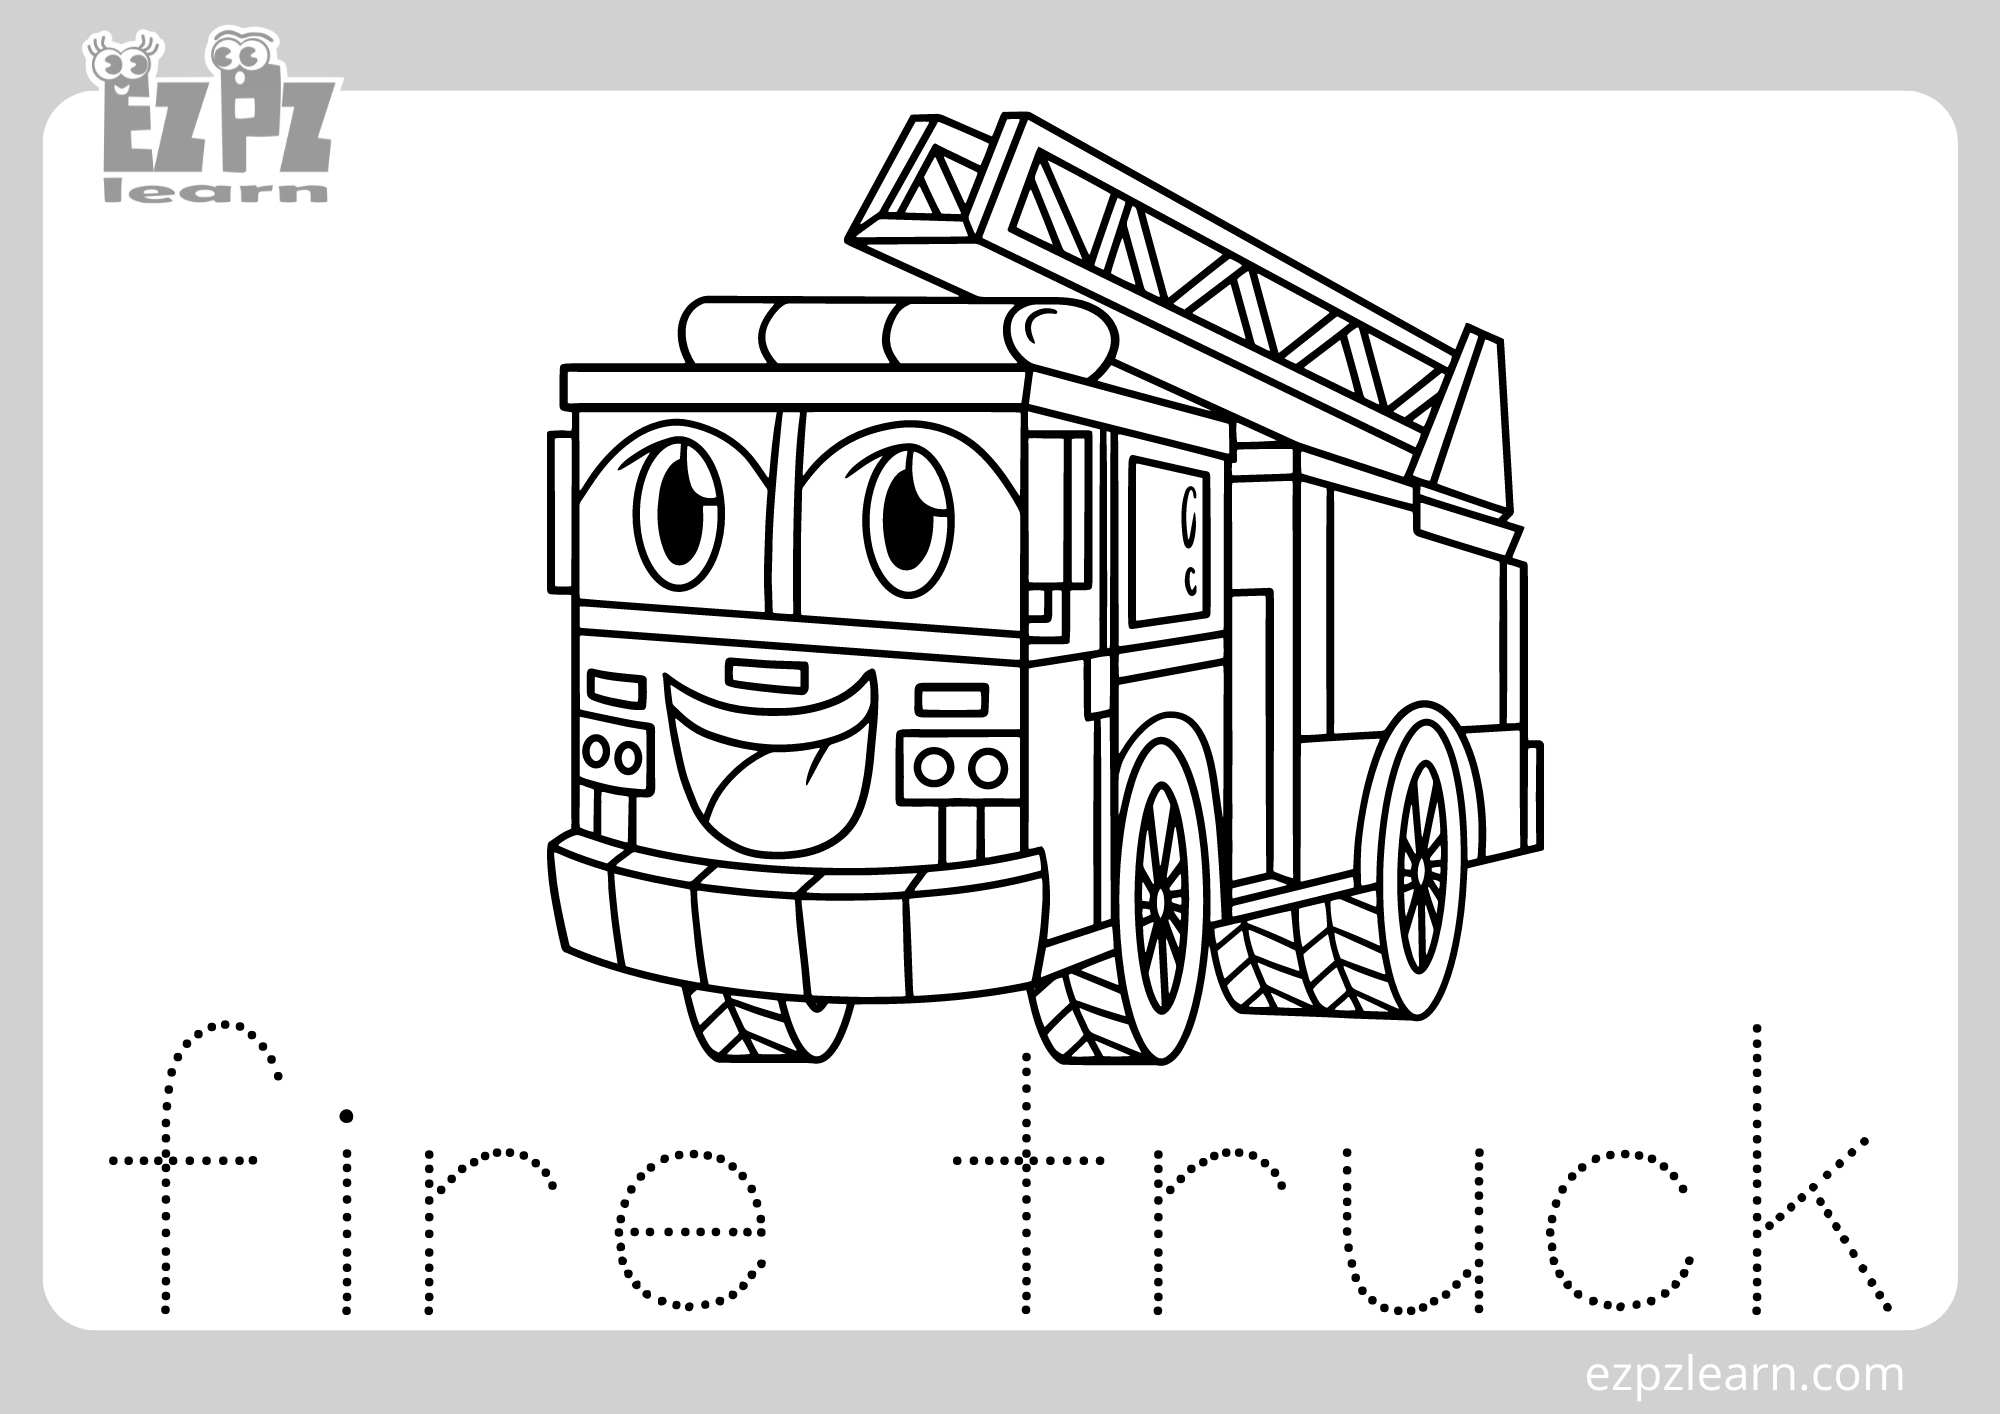 How to Draw a Truck for Kids (Trucks) Step by Step | DrawingTutorials101.com